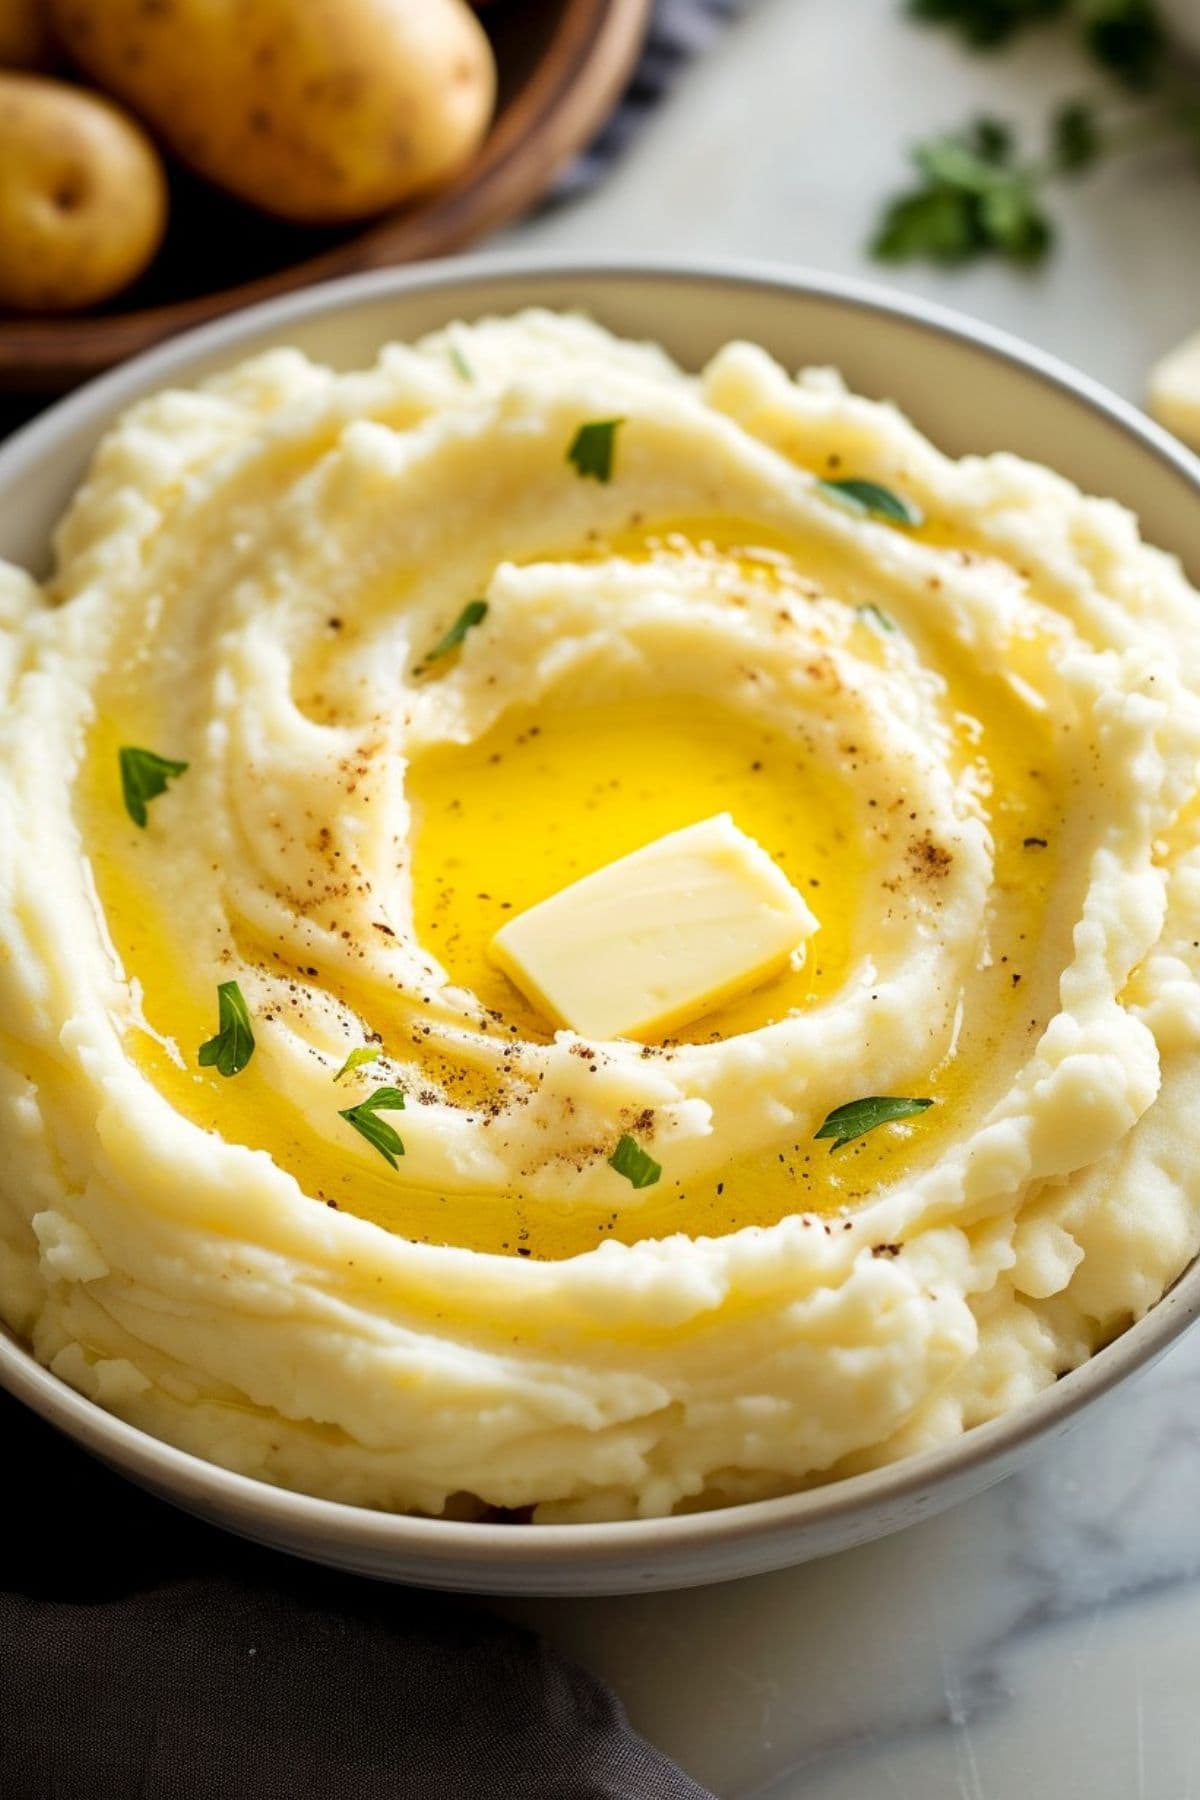 Homemade mashed potatoes with chives and butter